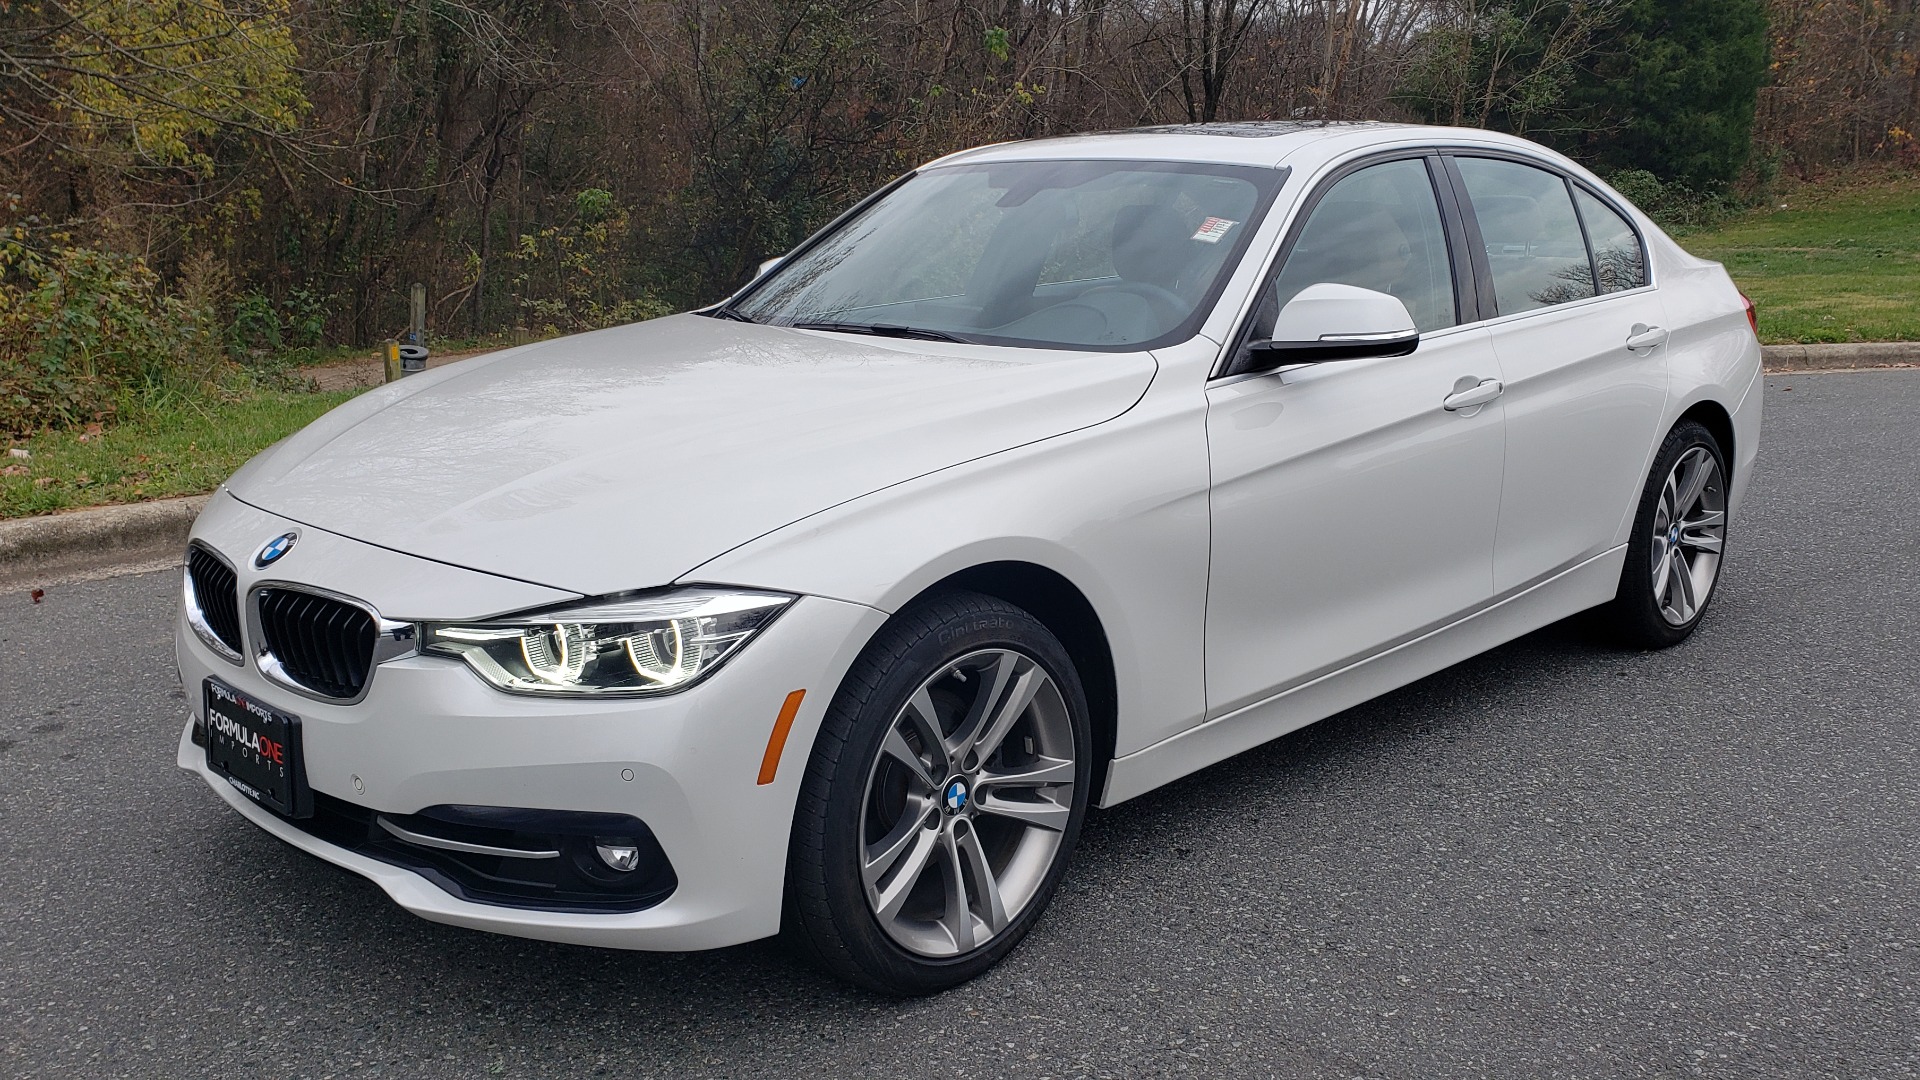 Used 2017 BMW 3 SERIES 330I XDRIVE PREMIUM / NAV / DRVR ASST / CLD WTHR / REARVIEW for sale Sold at Formula Imports in Charlotte NC 28227 1